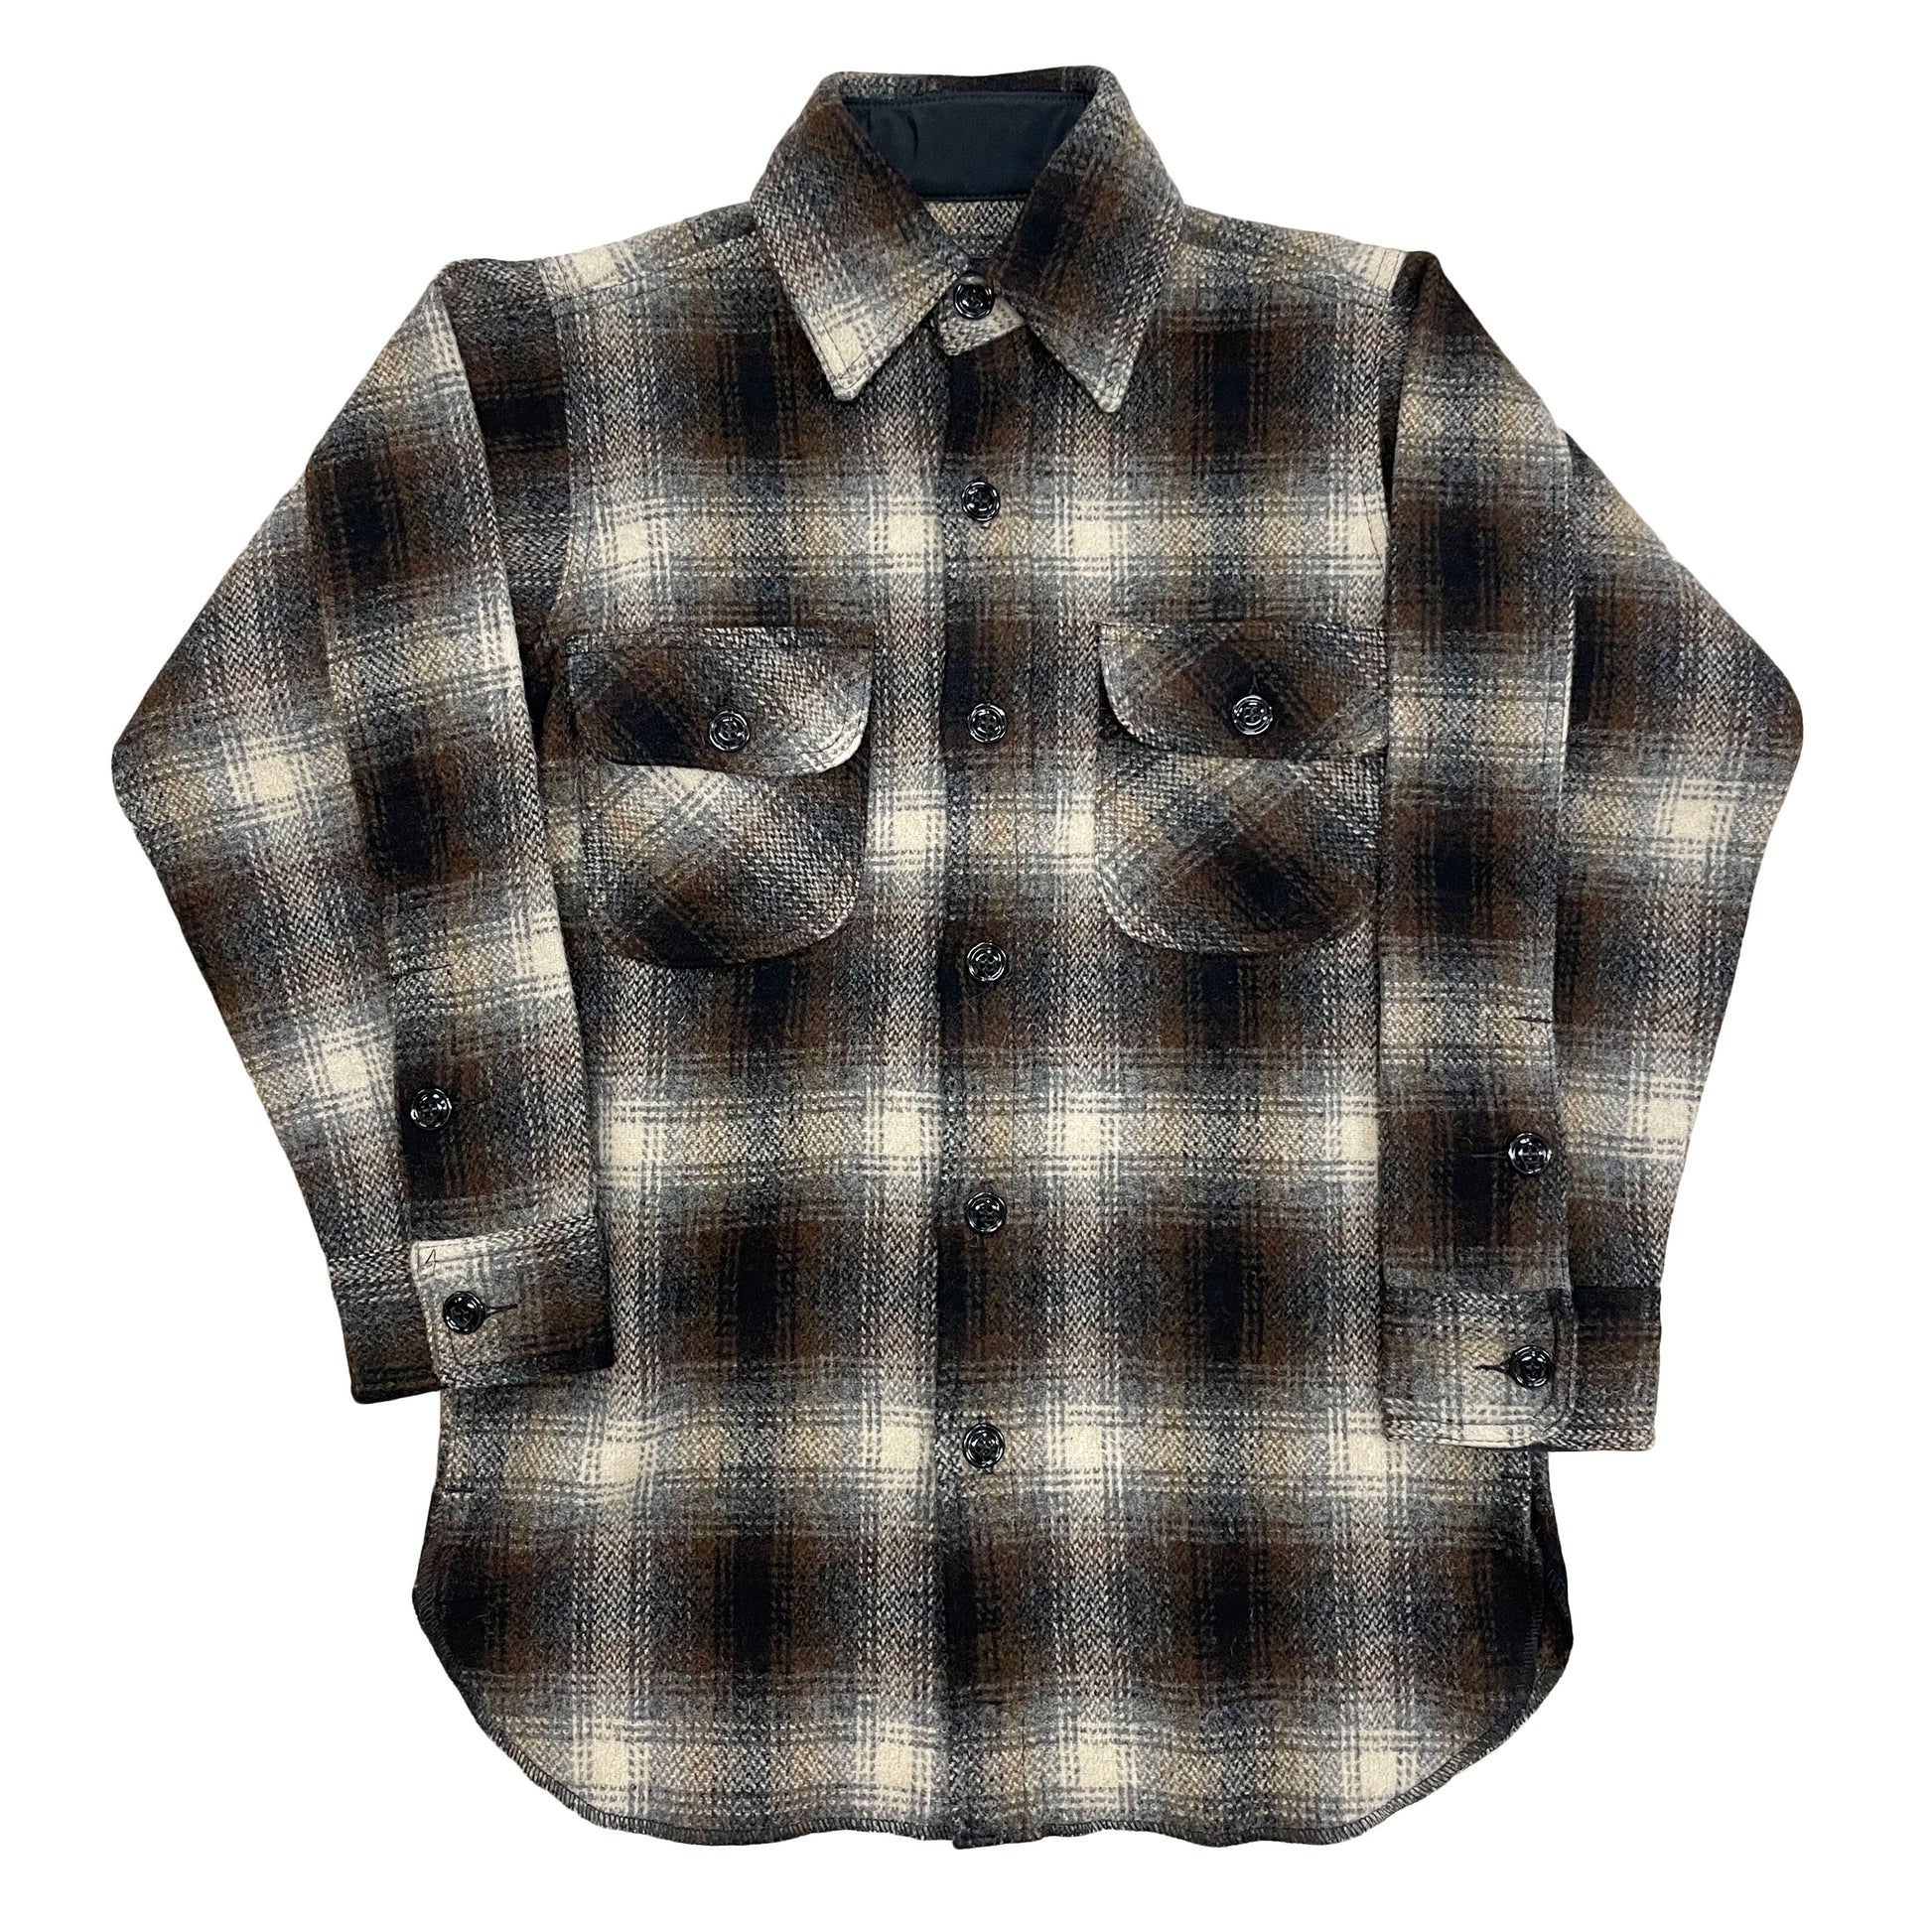 Long Tail Button Down long sleeve wool shirt with a 6 button front, button cuffs and two front chest pockets. Shown in gray, brown and black muted plaid